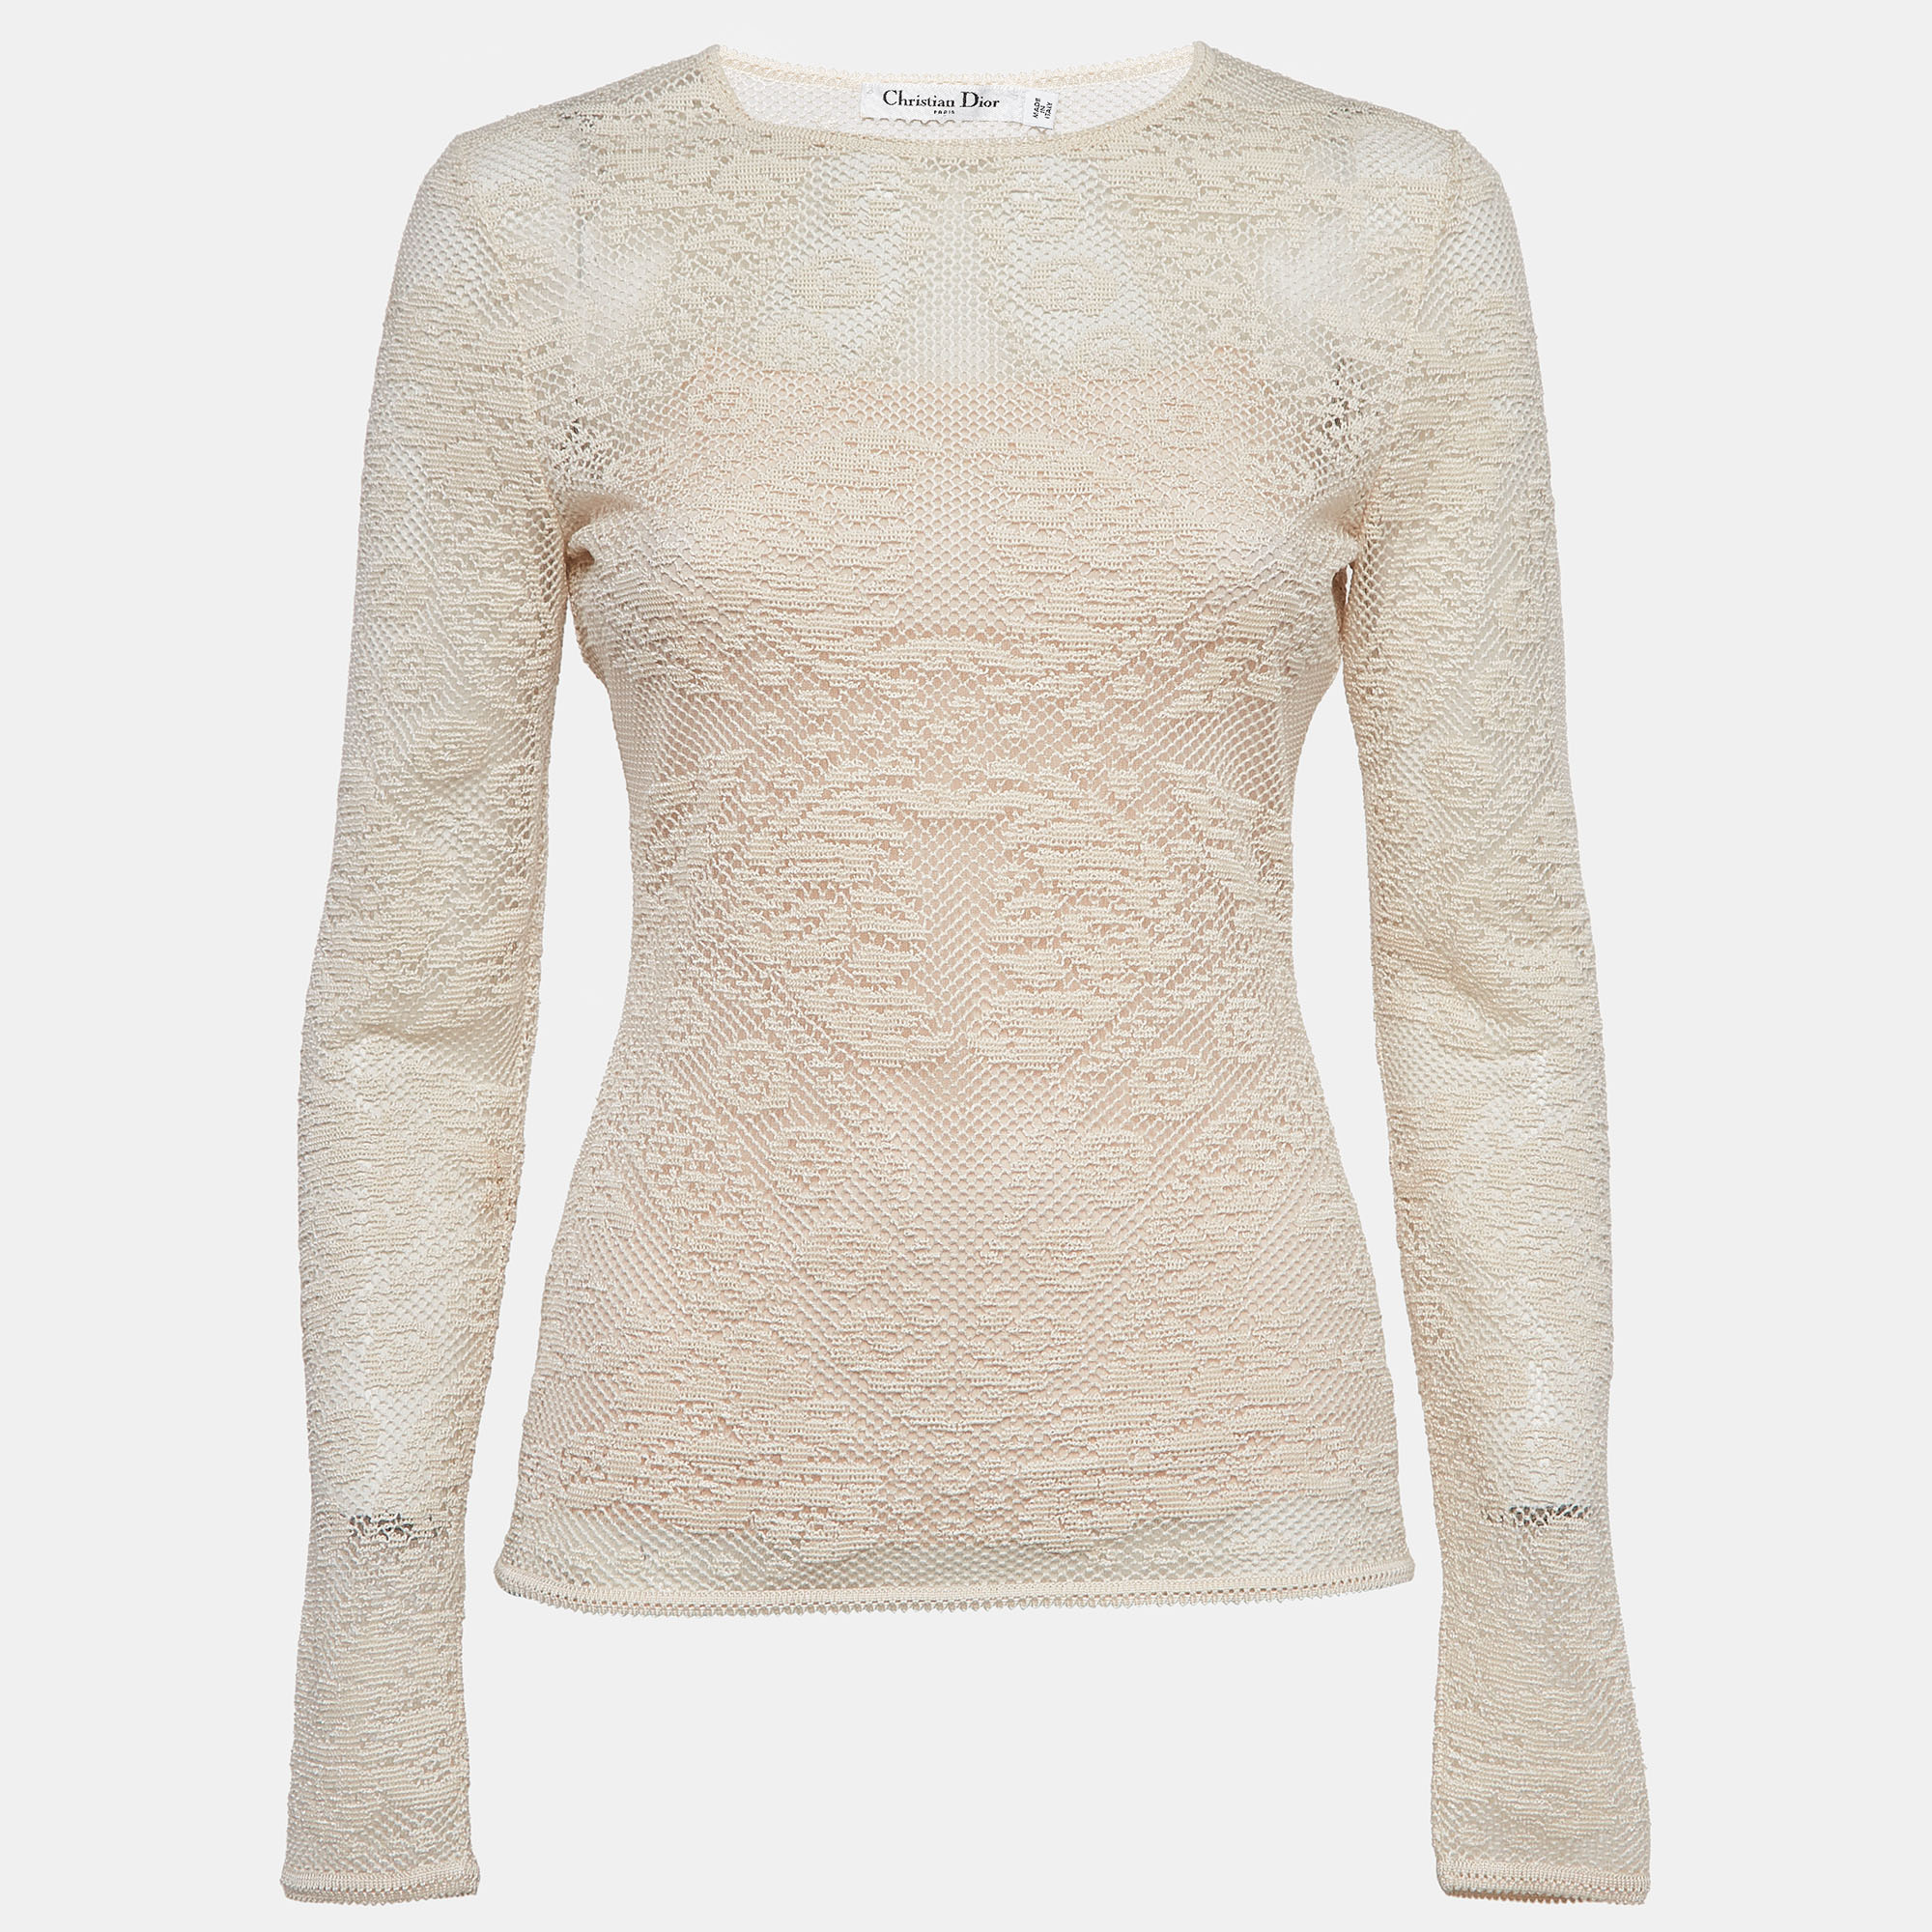 Christian dior beige tulle and crochet emi sheer top m